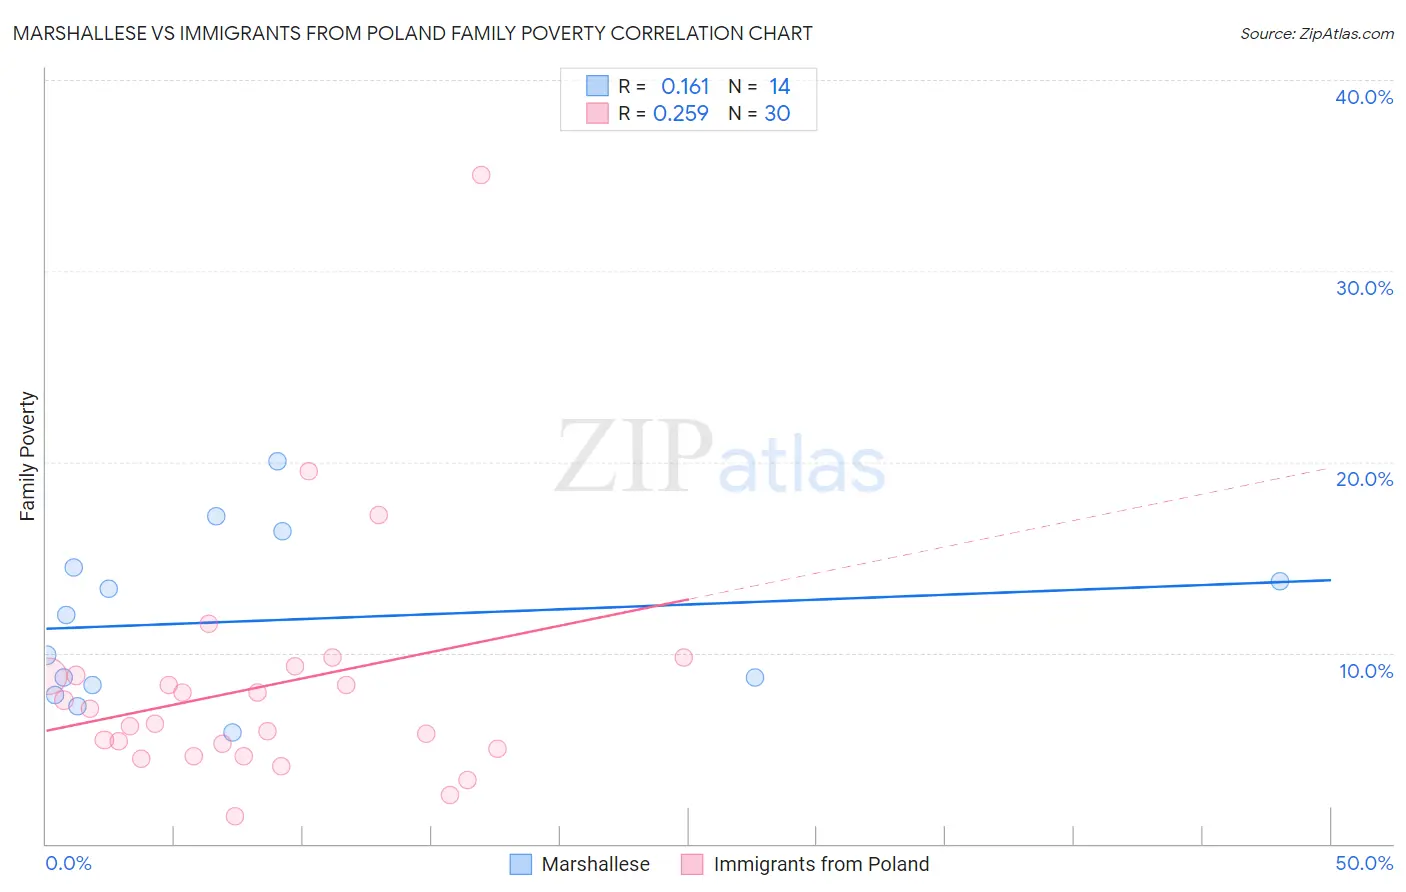 Marshallese vs Immigrants from Poland Family Poverty